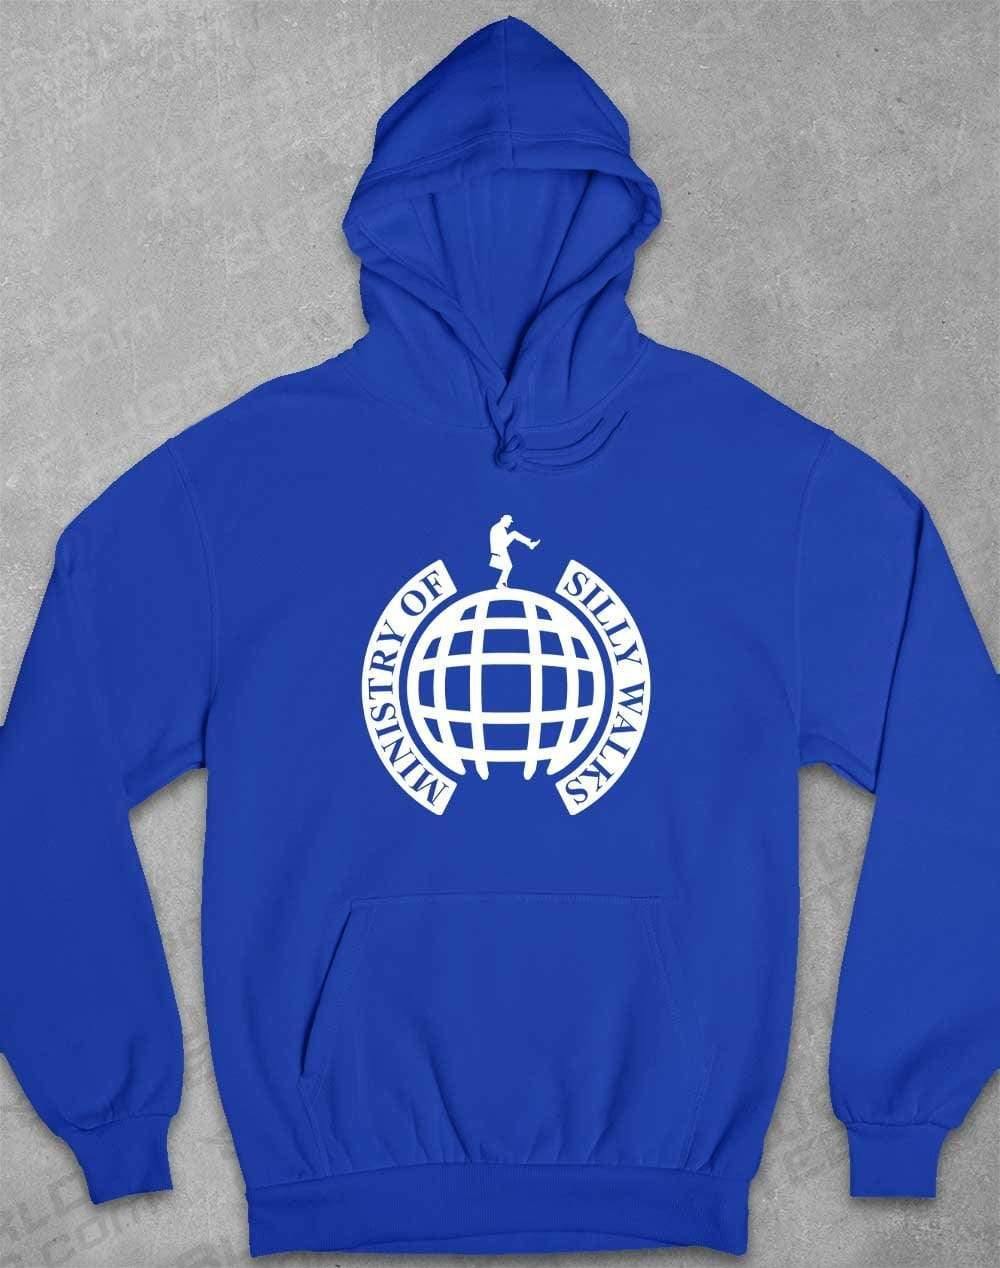 Ministry of Silly Walks Hoodie XS / Royal Blue  - Off World Tees